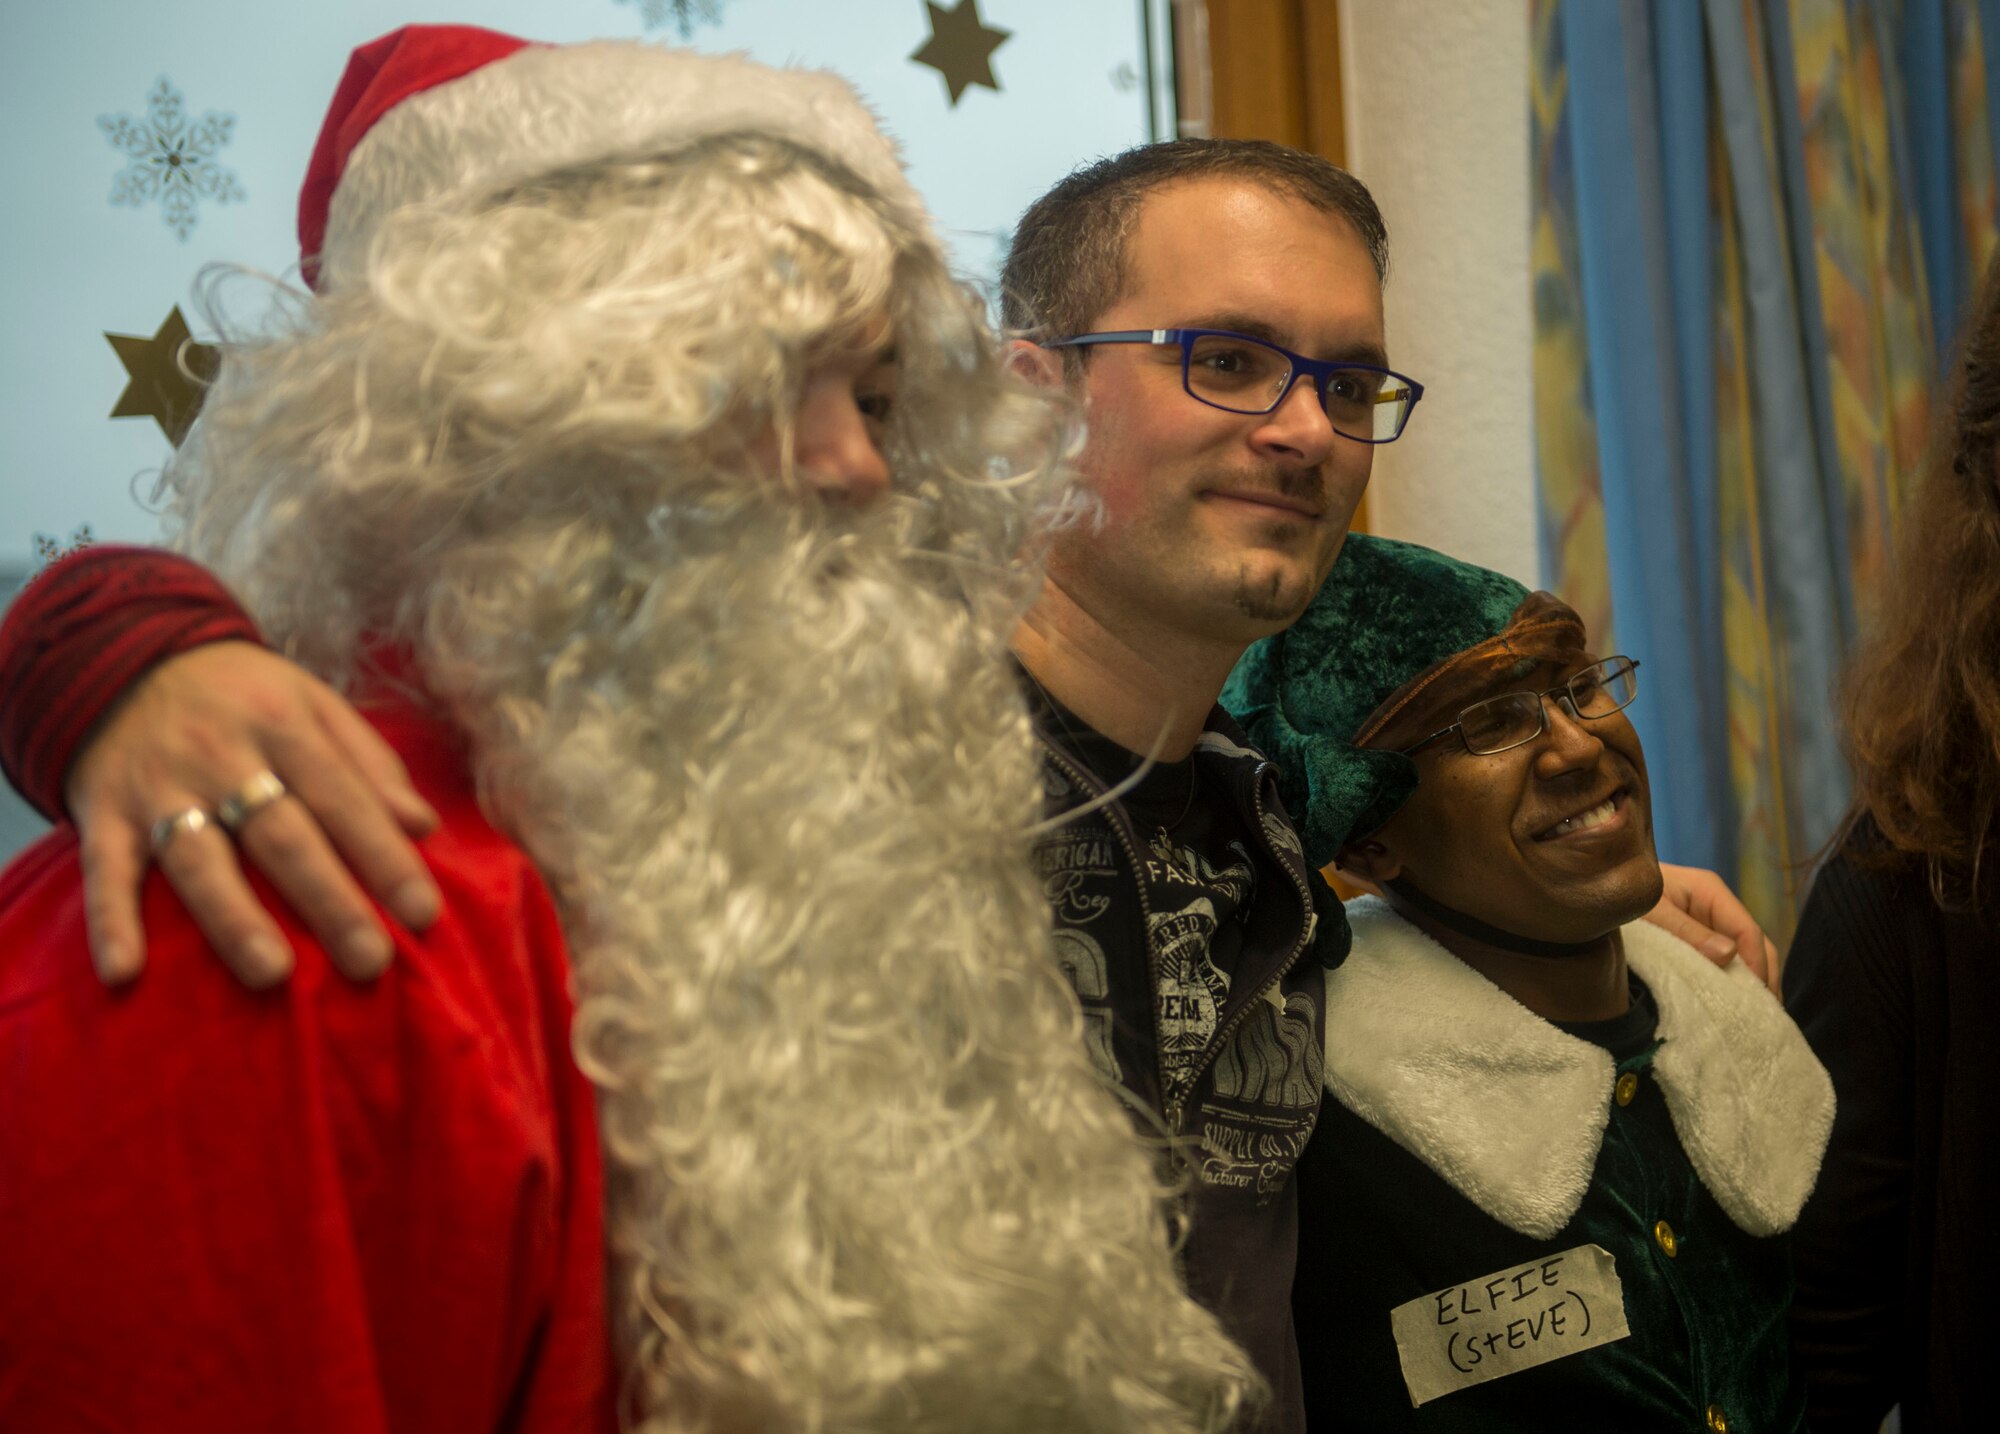 Dr. Alexander Knauff, University of Trier professor of social work and sciences and St. Vinzenzhaus caretaker, poses for a photo with Santa Claus and an elf during a holiday party at the institution of child and youth services in Speicher, Germany, Dec. 13, 2015. Volunteers from Spangdahlem Air Base’s First Four group selected two individuals to dress as Santa Claus and a Christmas elf to entertain the children. (U.S. Air Force photo by Airman 1st Class Timothy Kim/Released)